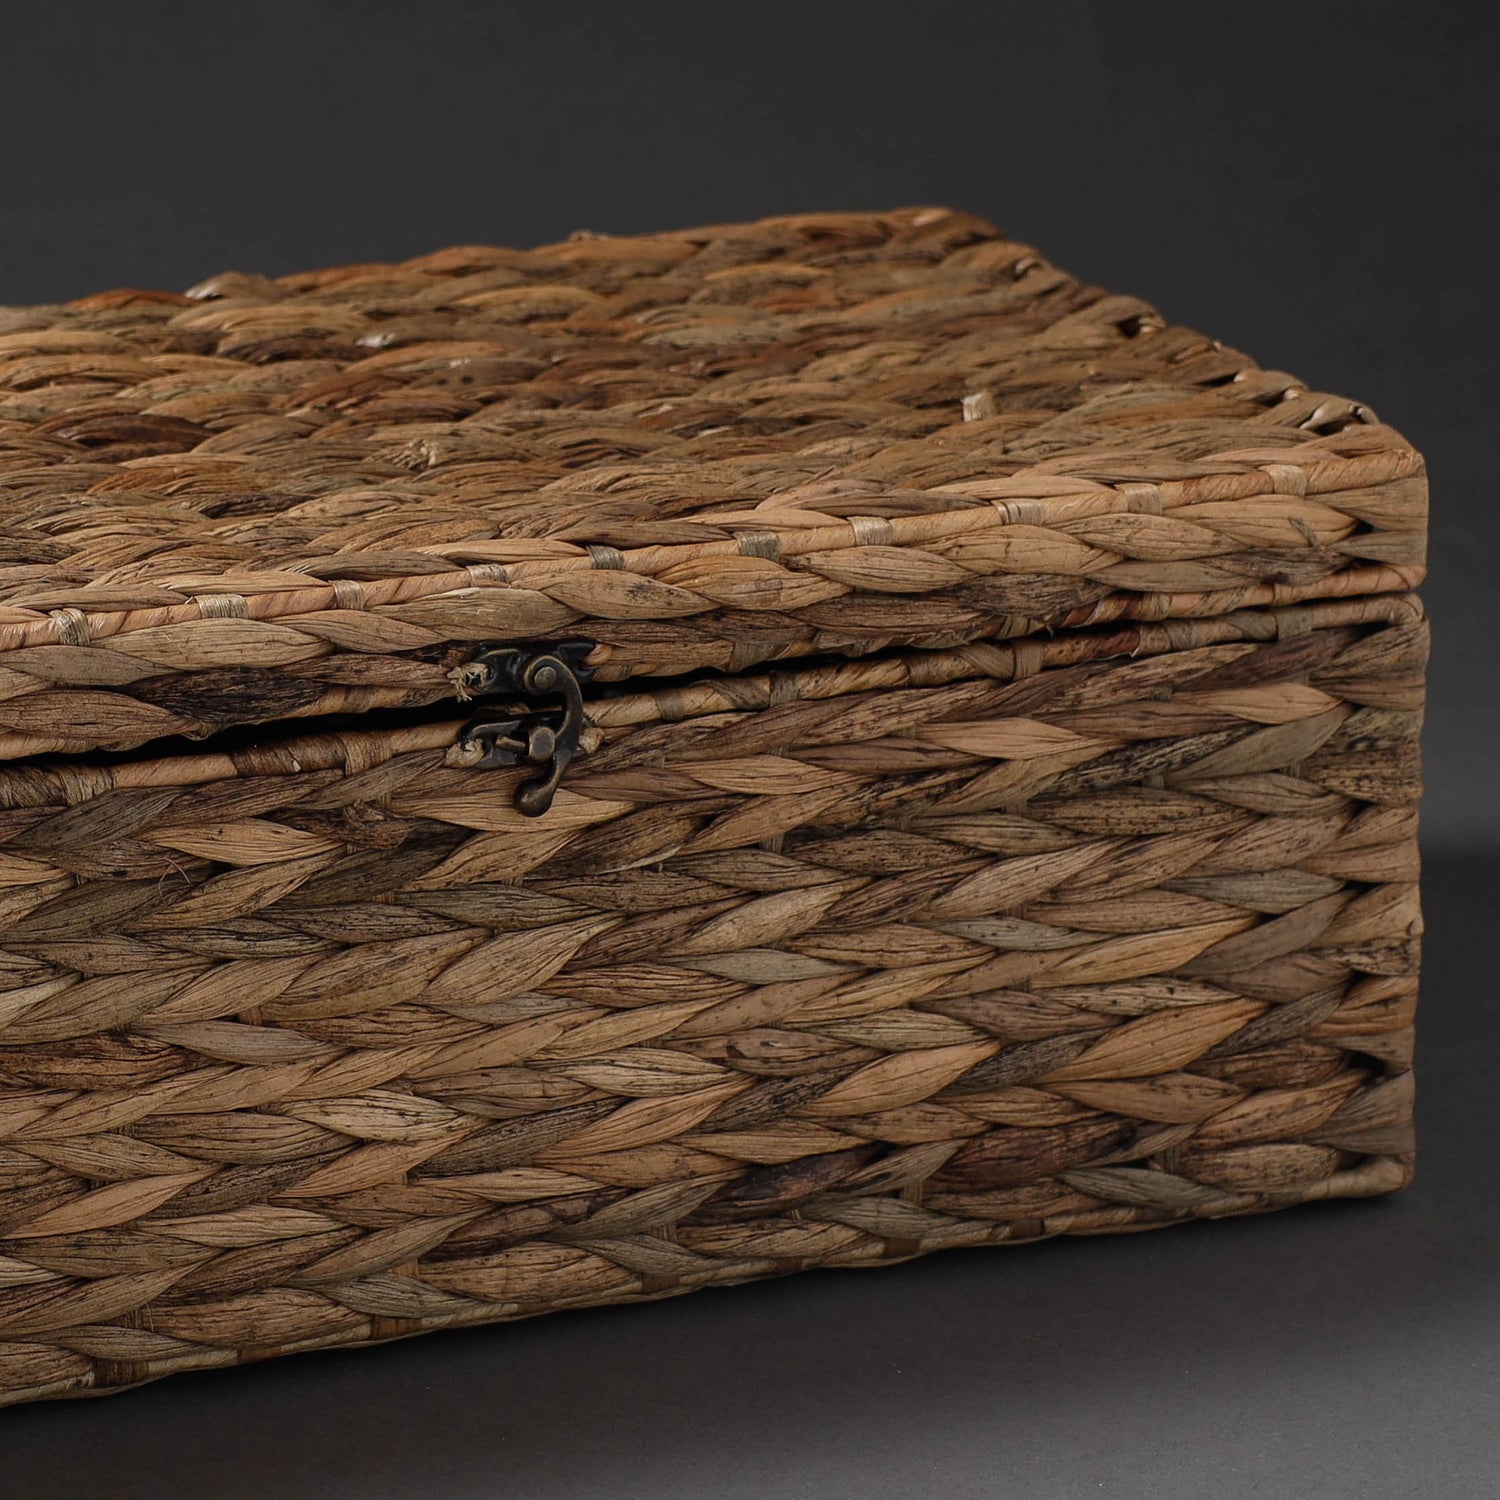 Handcrafted Organic Water Hyacinth Storage Trunk (15 x 8 in)